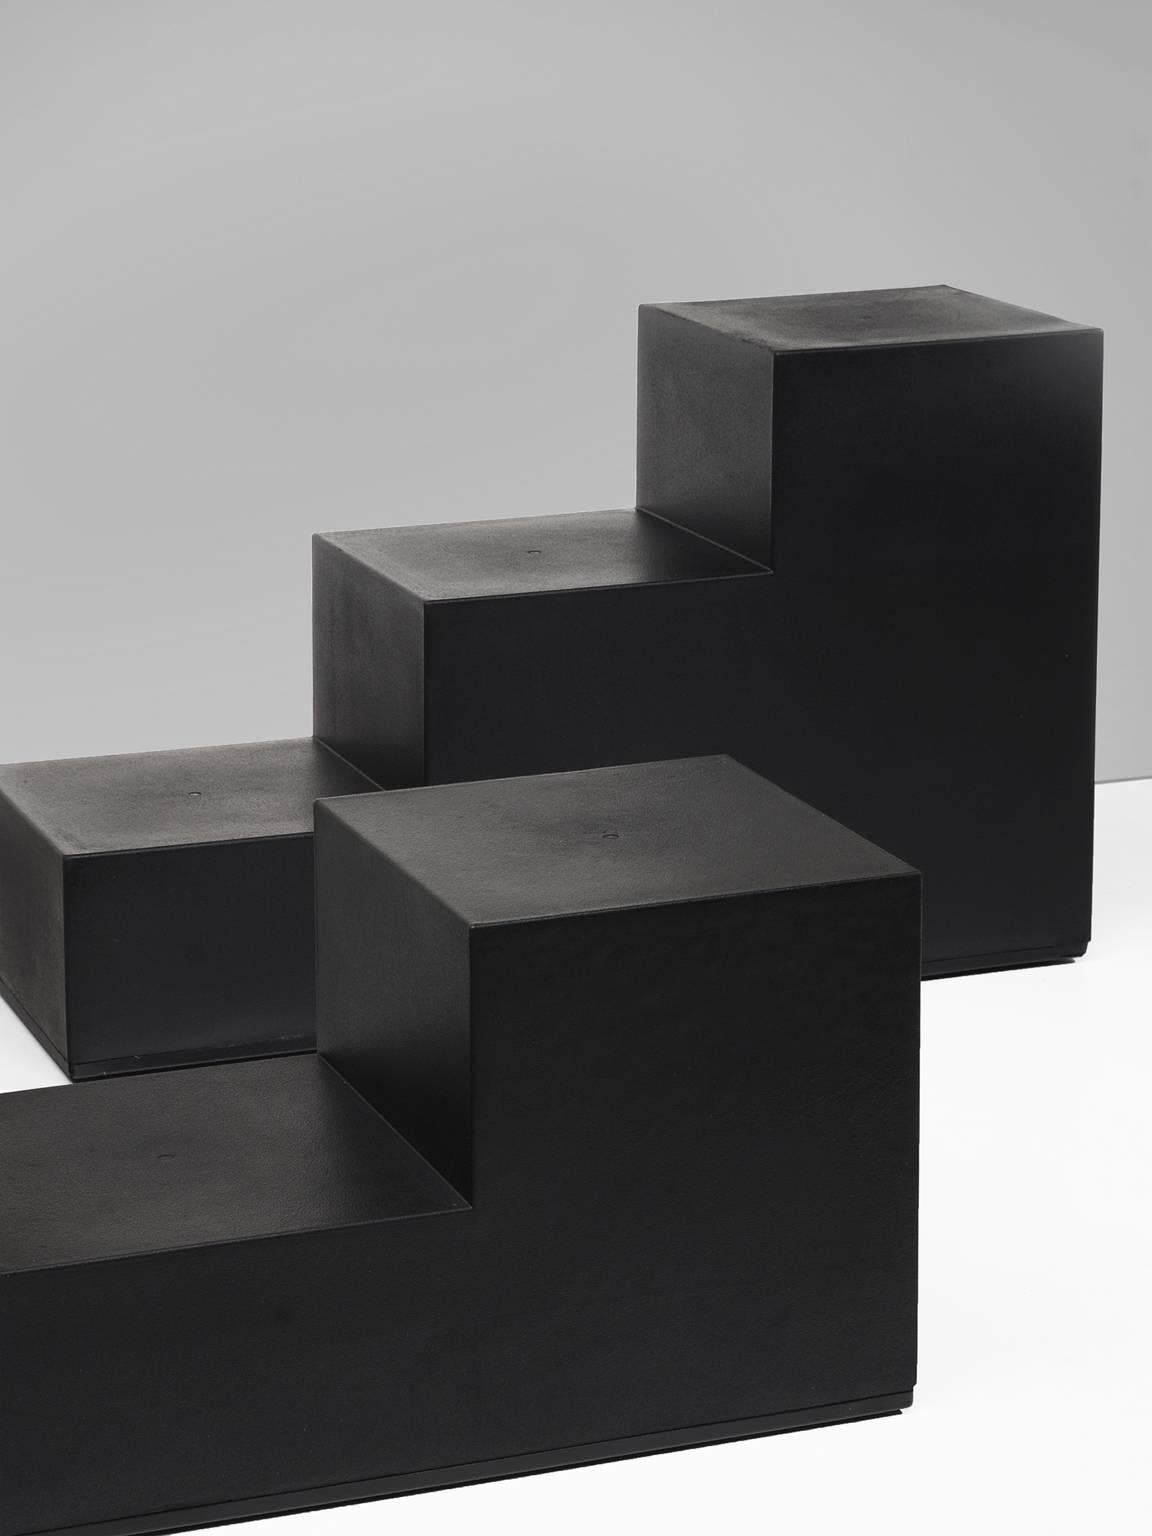 Side tables or seats, polyurethane in black, Mario Bellini for B&B, Italy, 1971. 

These versatile 'chess' building blocks can be used both as tables or seats. Signed with manufacturer's marks C&B and are made out of self-skinning polyurethane.